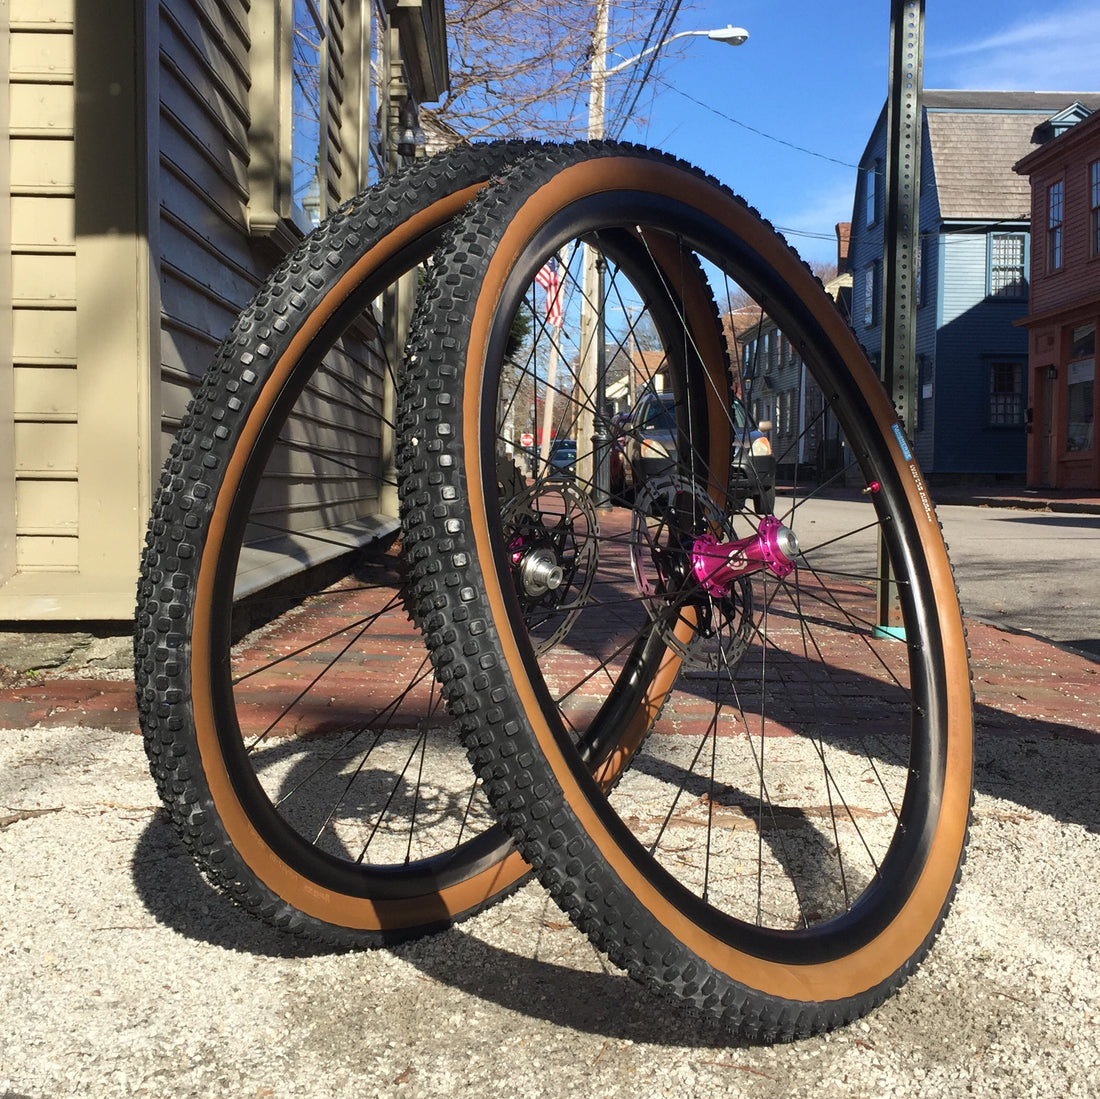 Paired spokes, and the dreaded "get away with"